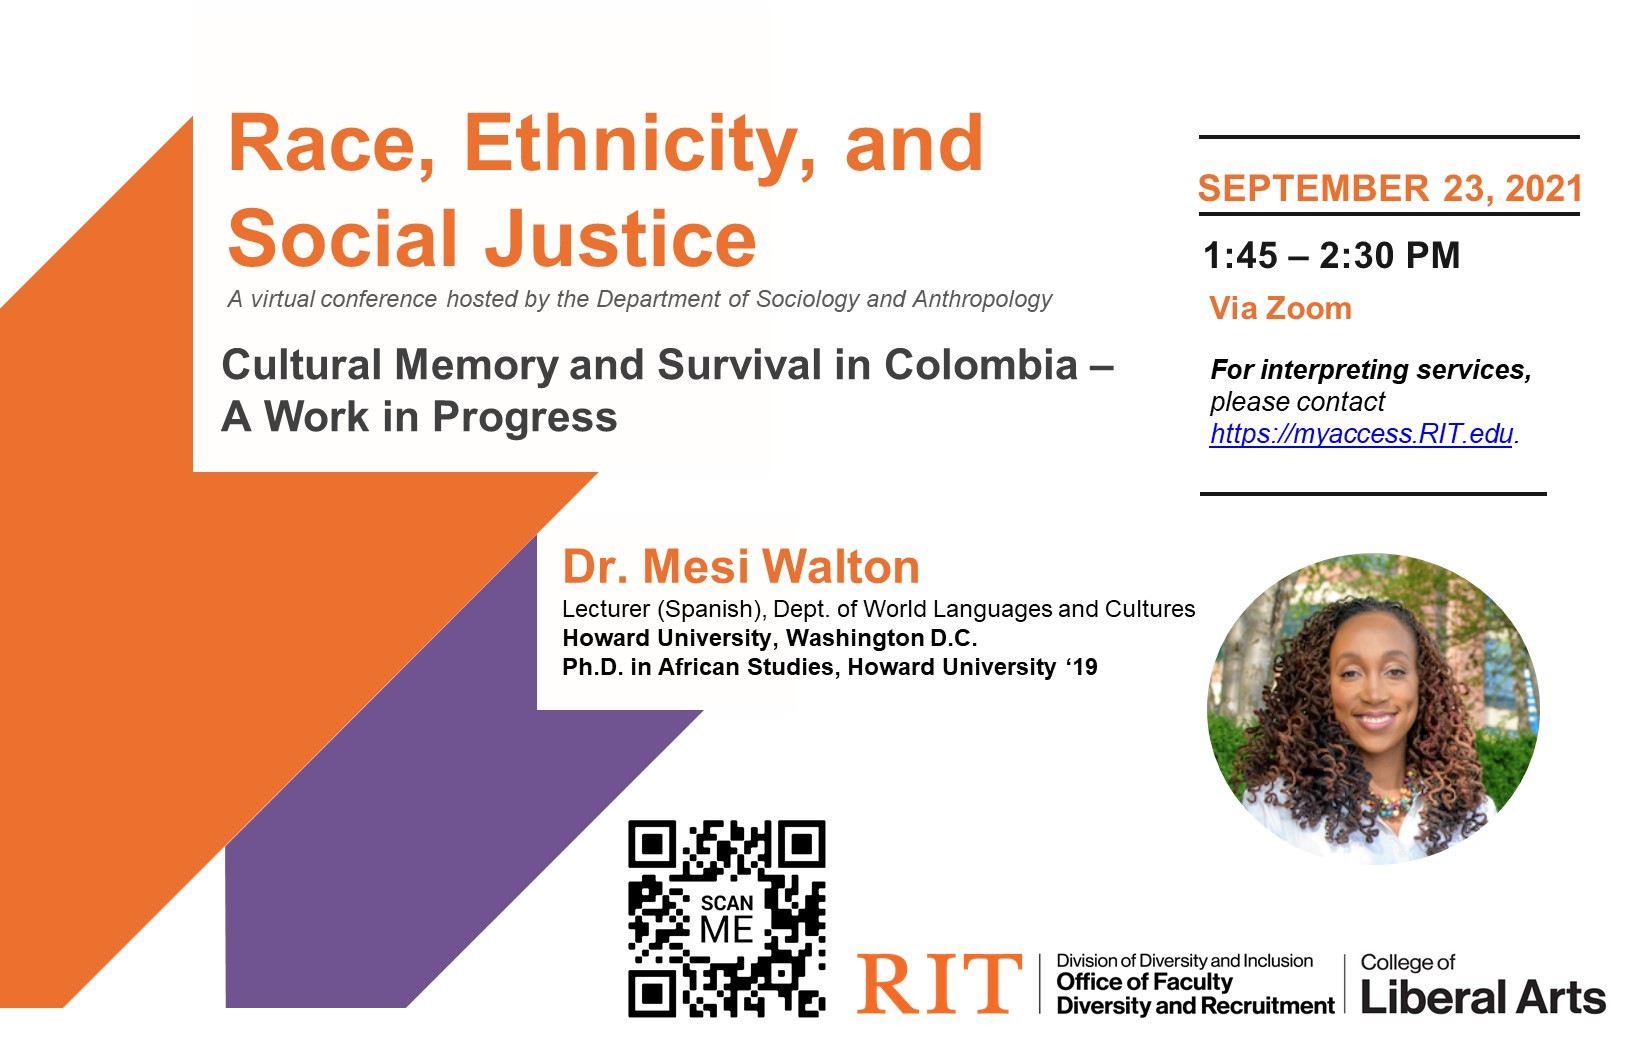 A flyer describing Cultural Memory and Survival in Colombia - A work in progress